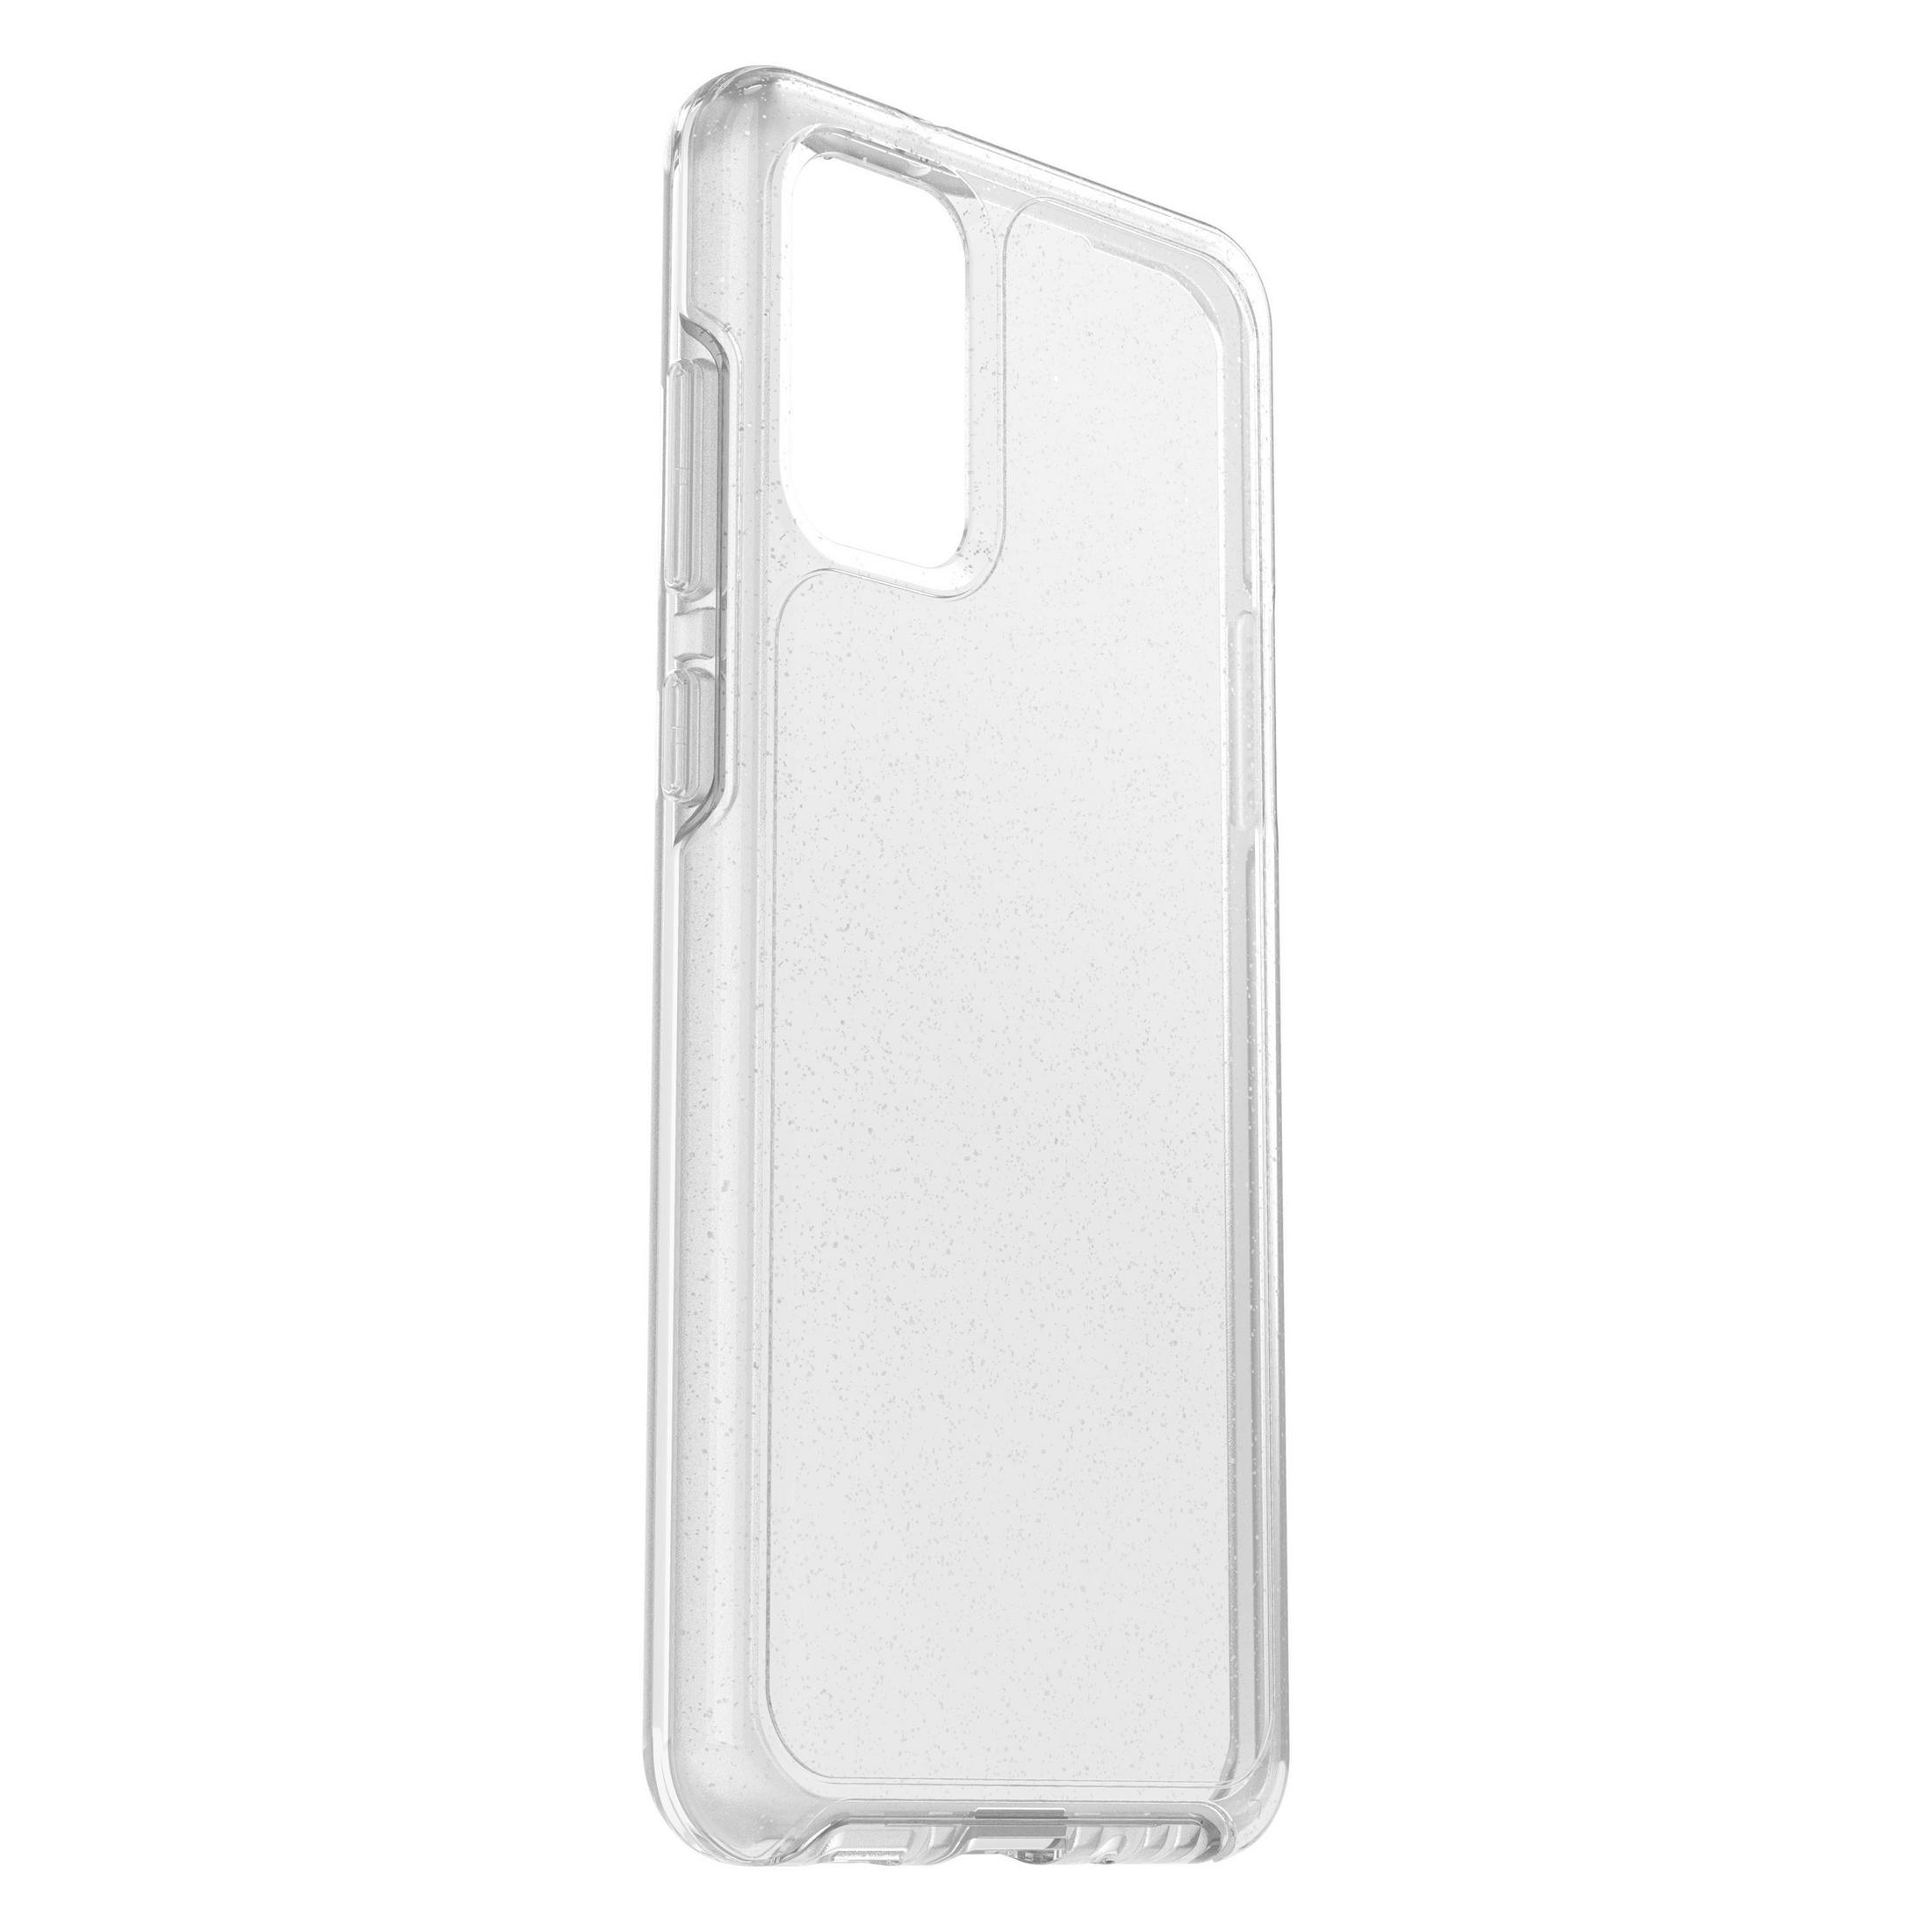 S20+, OTTERBOX S20+ CLEAR Transparent Backcover, STARDUST CLEAR, Samsung, Galaxy SYMMETRY 77-64282